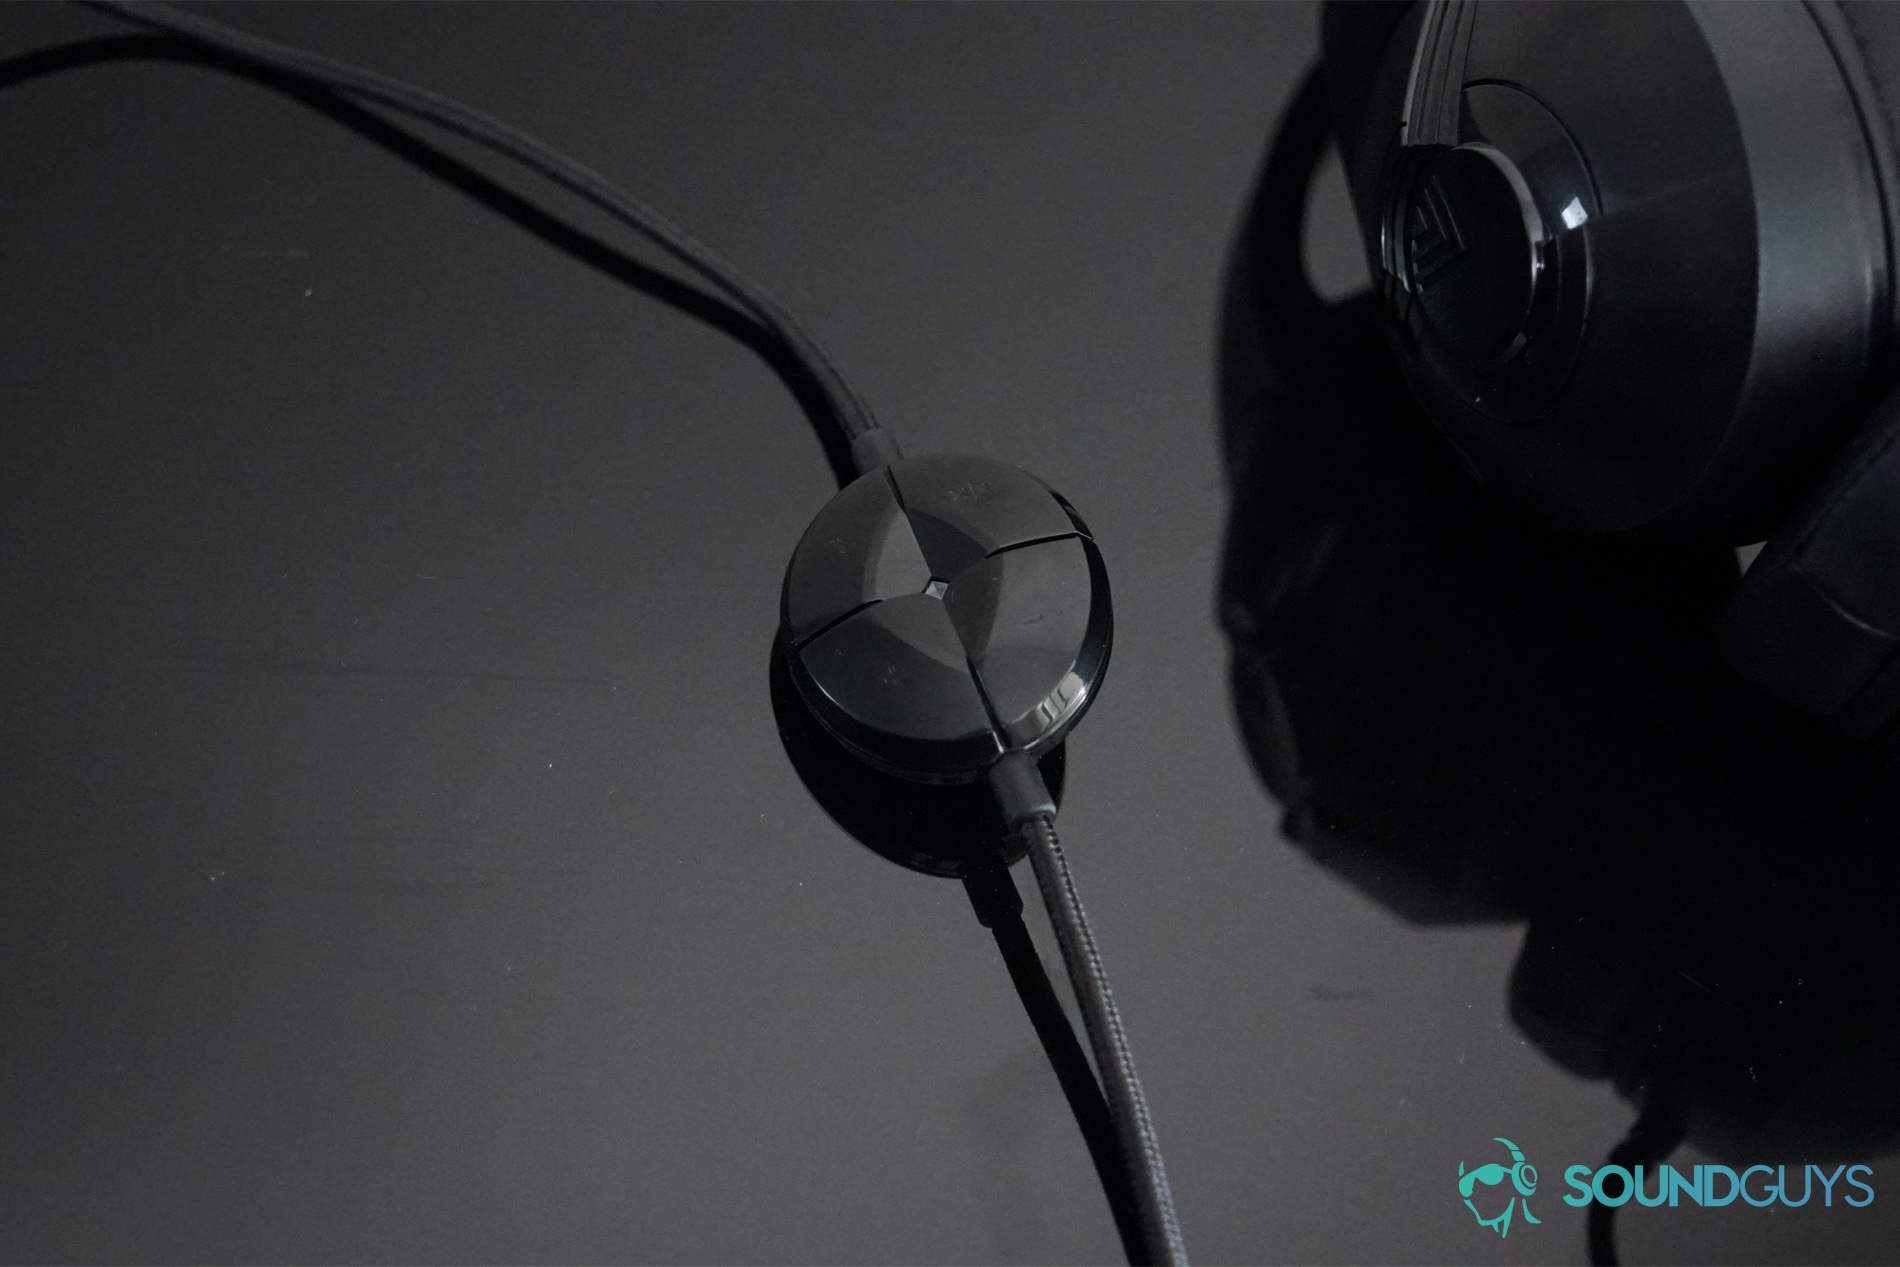 The AmazonBasics USB Gaming headset sits next to its inline controls on a reflective black surface.